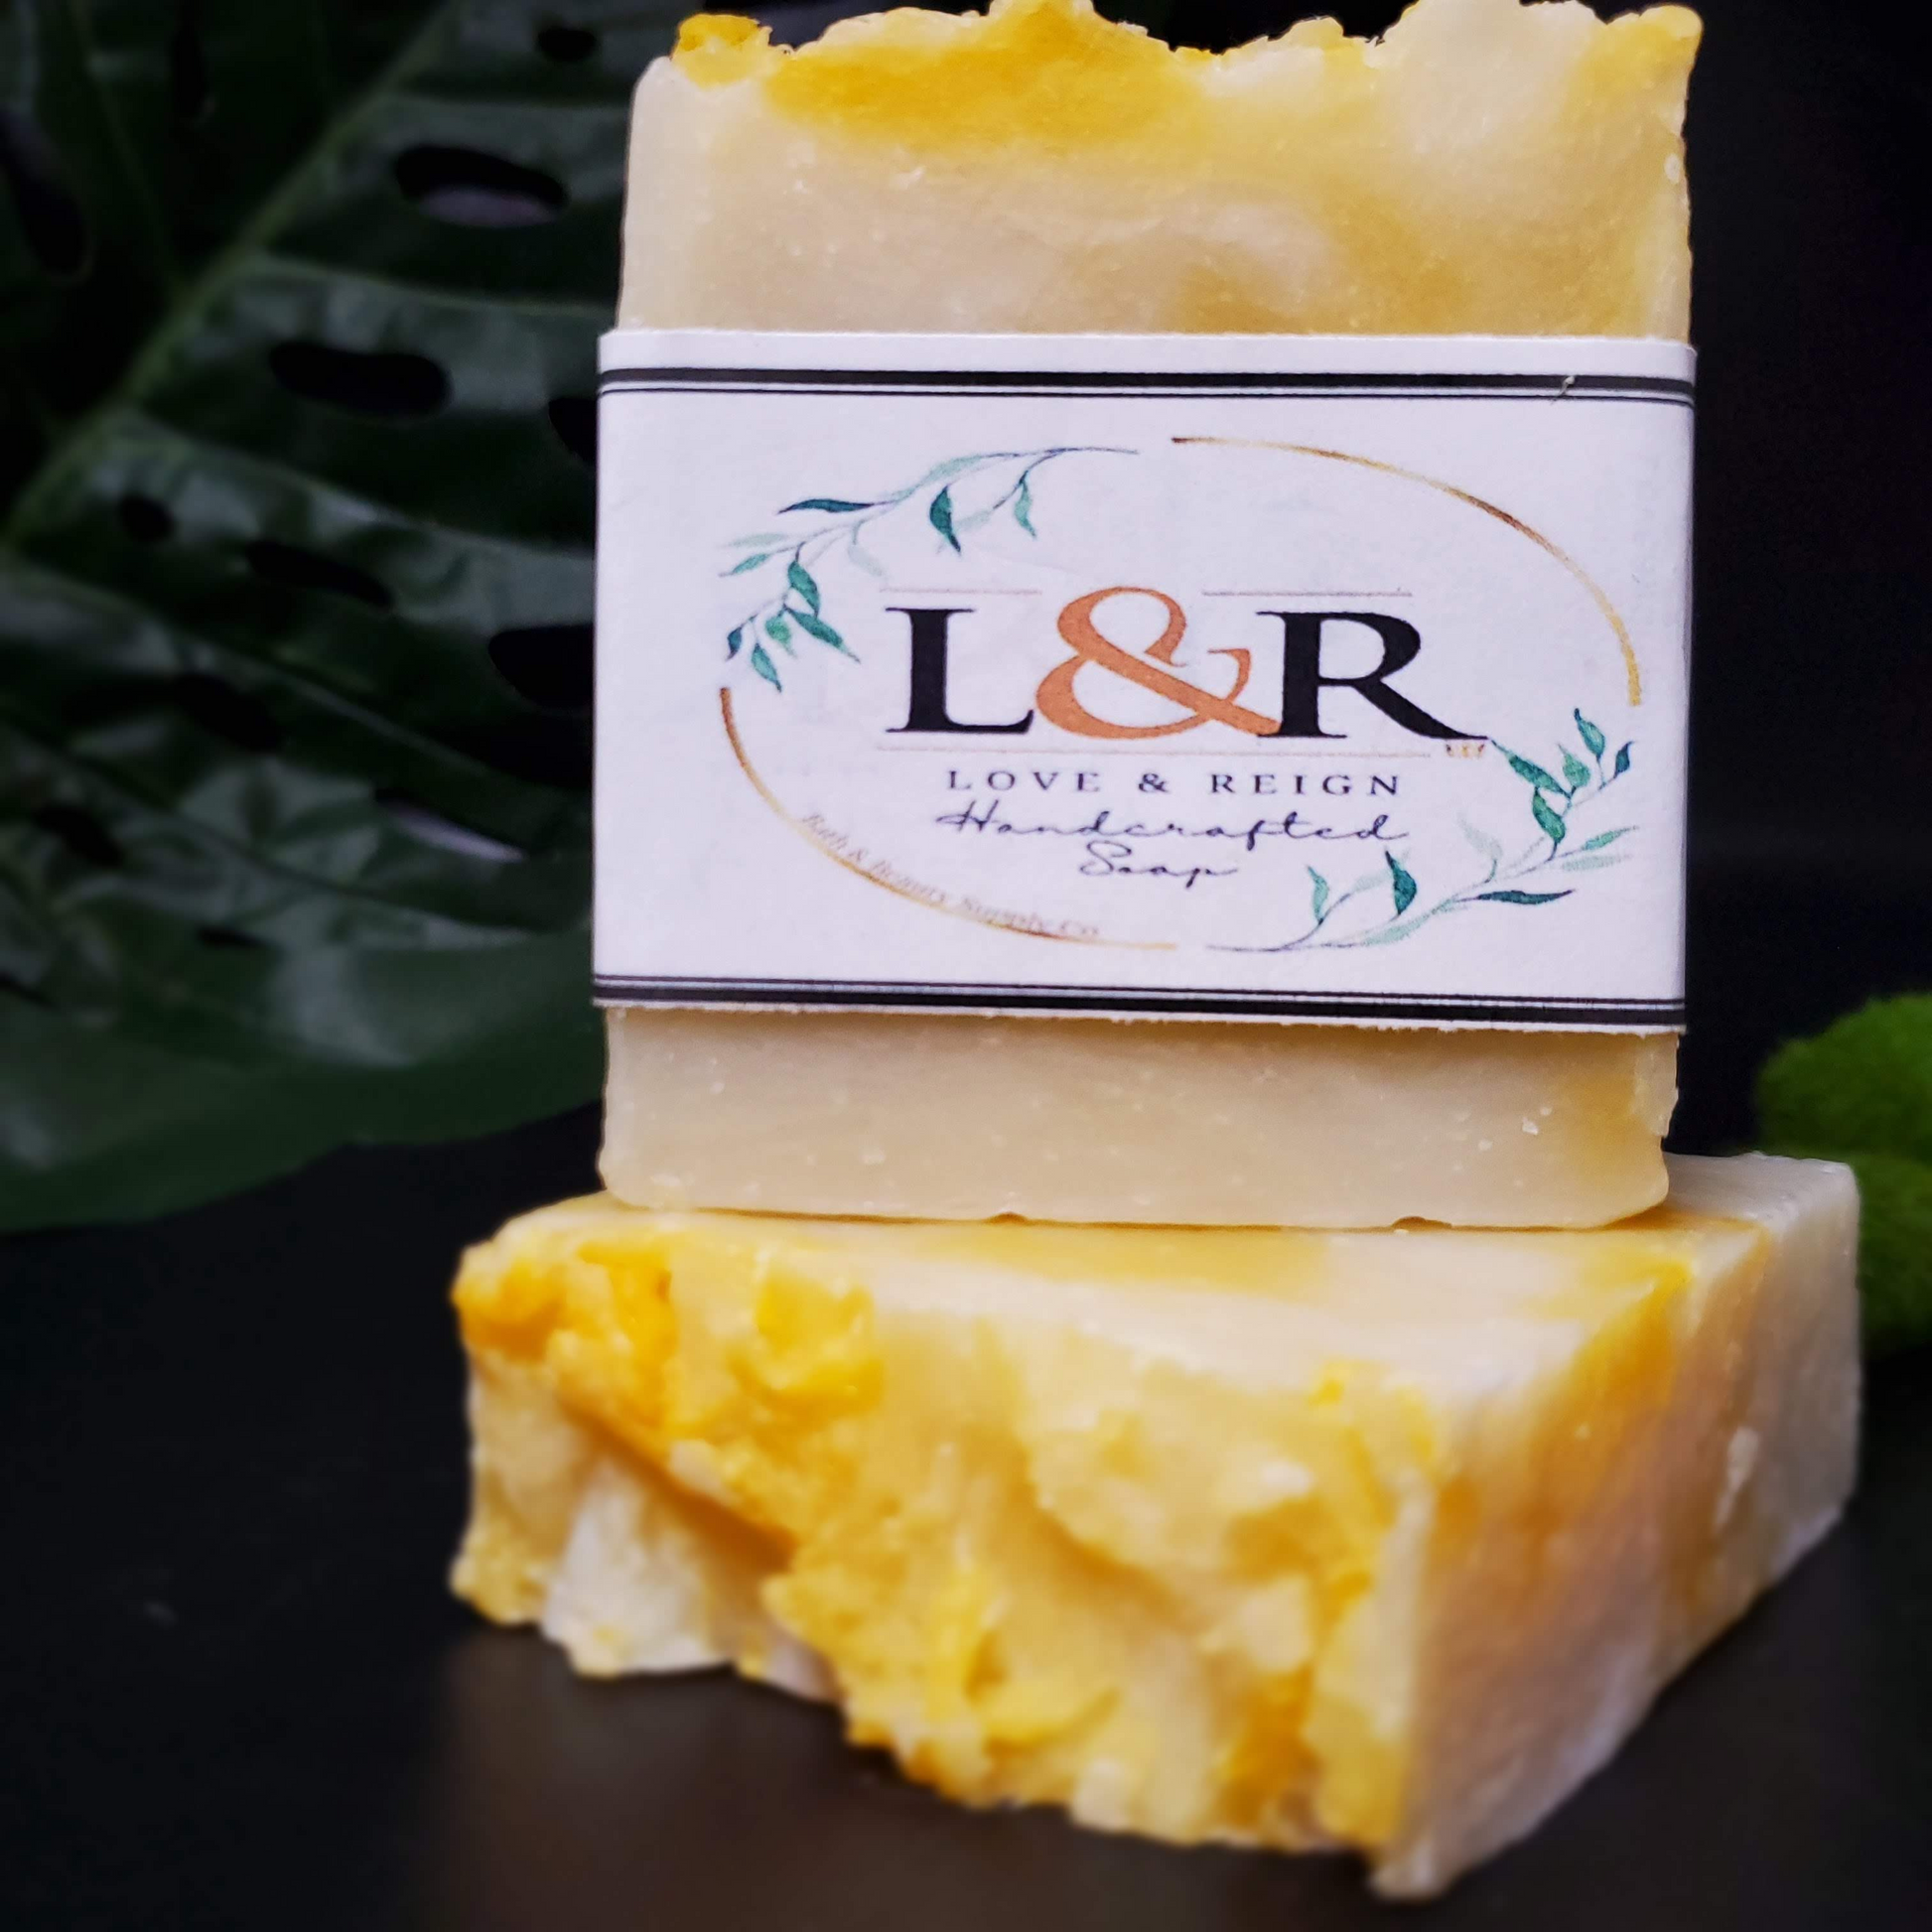 Formulated using a plant based recipe, designed to cleanse your skin and provide moisturization. Our soap designs and fragrances are made with natural colorants and pure essential oils. Naturally pigmented with annatto seed powder.  Scented with lavender & patchouli essential oils.  Calming scent profile. 